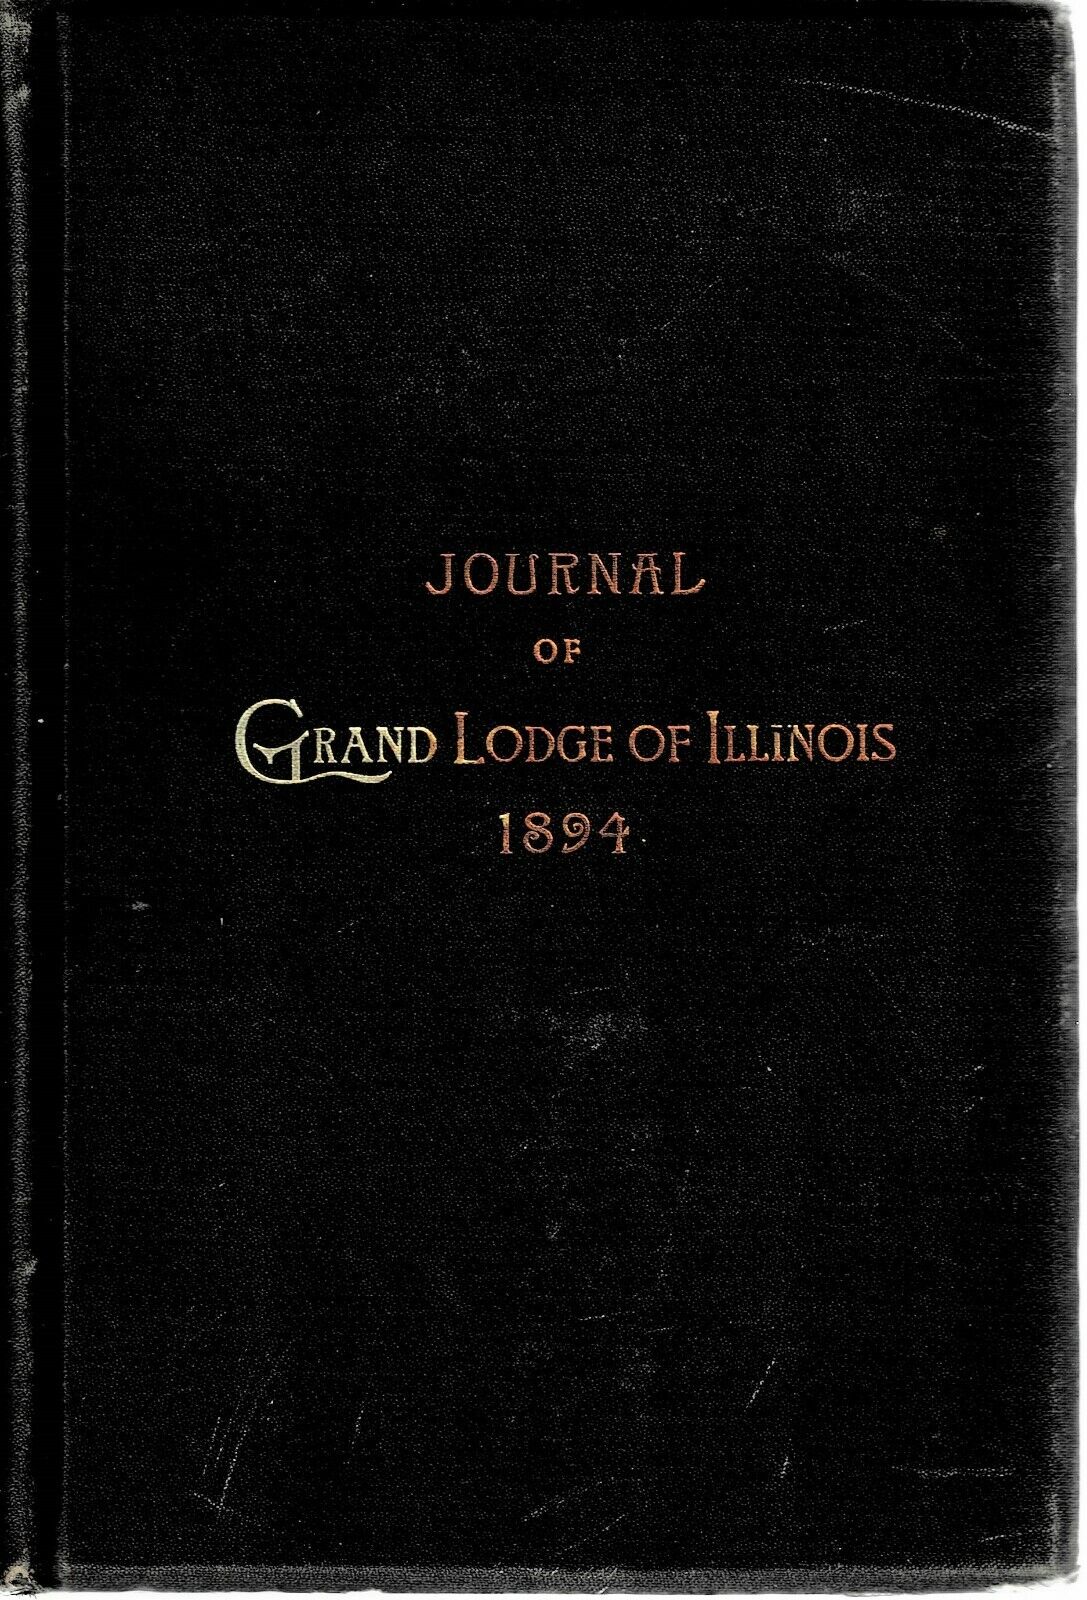 Journal Of Proceedings-1894-57th Annual Session-Grand Lodge Of IL-IOOF-1156 Pgs